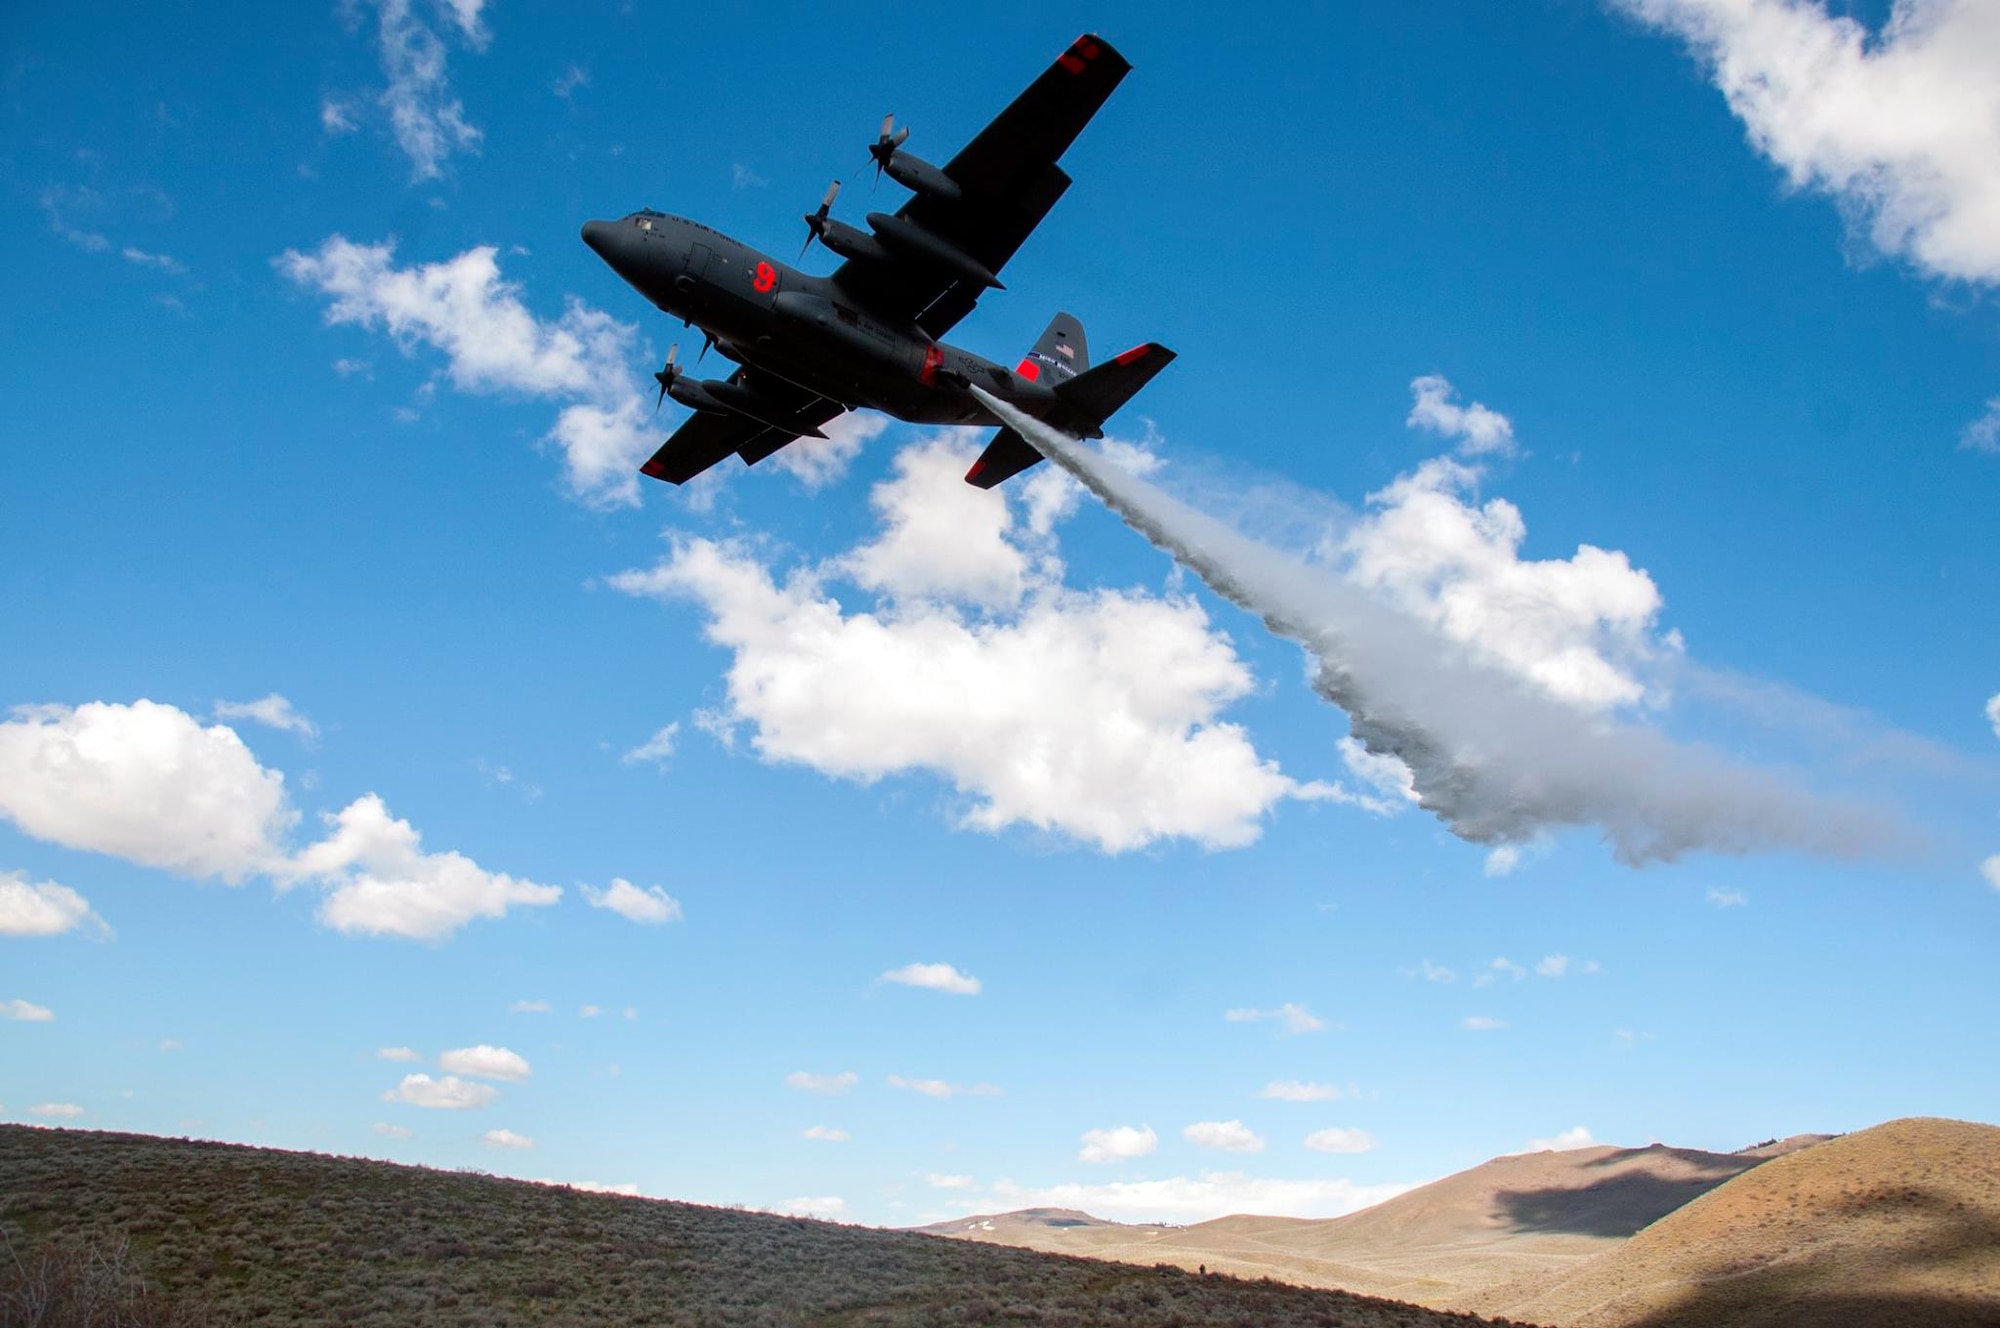 A Nevada Air National Guard, 152nd Airlift Wing C-130 does a water drop during training April 21, 2017 in the mountains outside Boise, Idaho. All four C-130 units: 302nd Airlift Wing (Air Force Reserve unit), 146th Airlift Wing, 153rd Airlift Wing and 153rd Airlift Wing (all three Air National Guard units) gathered  to do their annual Modular Airborne Fire Fighting System certification/recertification training from April 19-25, 2017.